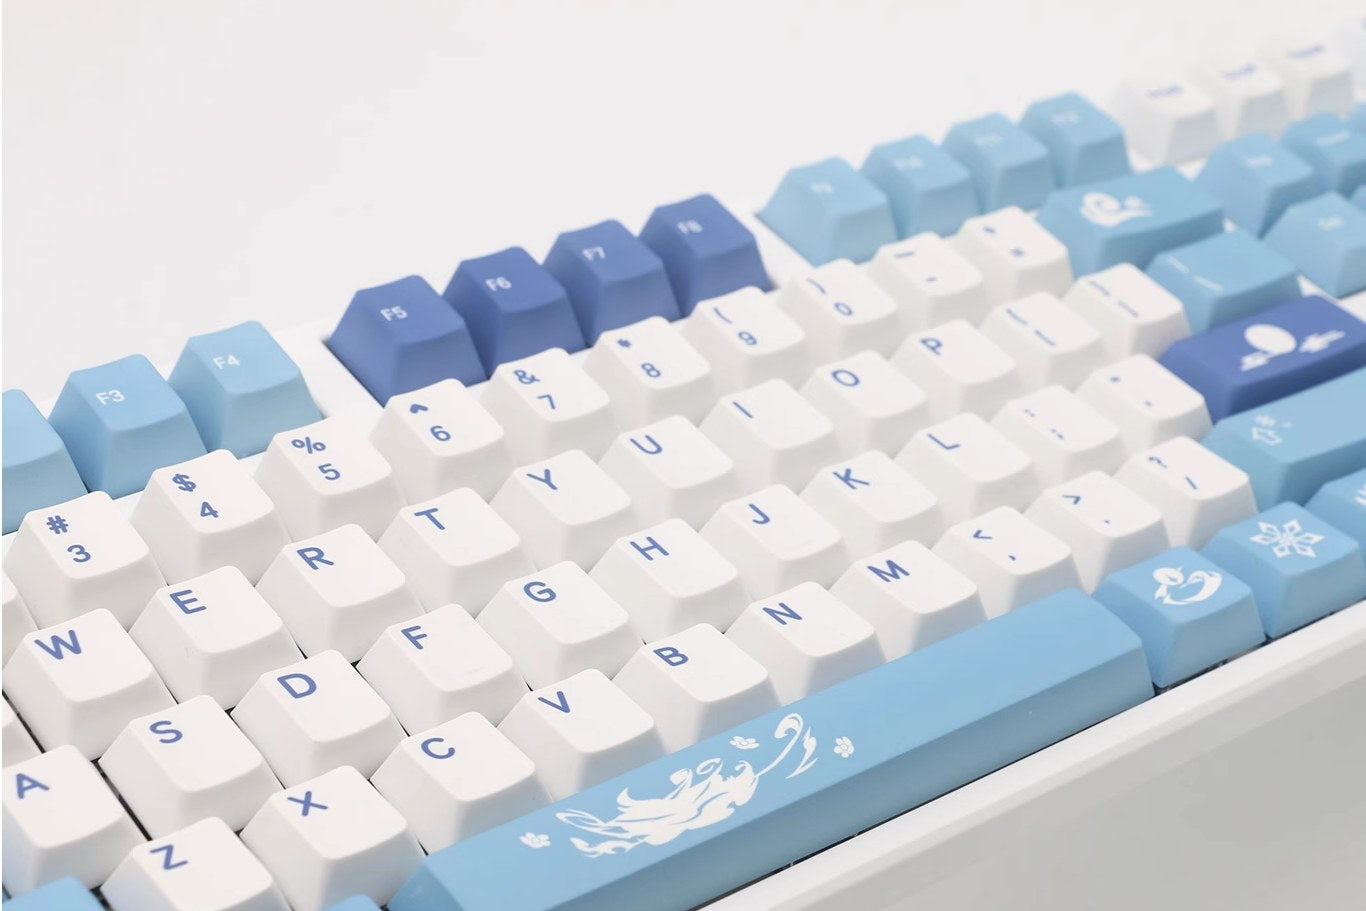 ❄️ Frozen Elegance: Crafted with precision and dedication, these keycaps showcase Ganyu's elegance and grace. The frosty theme mirrors her cryo abilities, creating an immersive experience for fans and gamers alike.